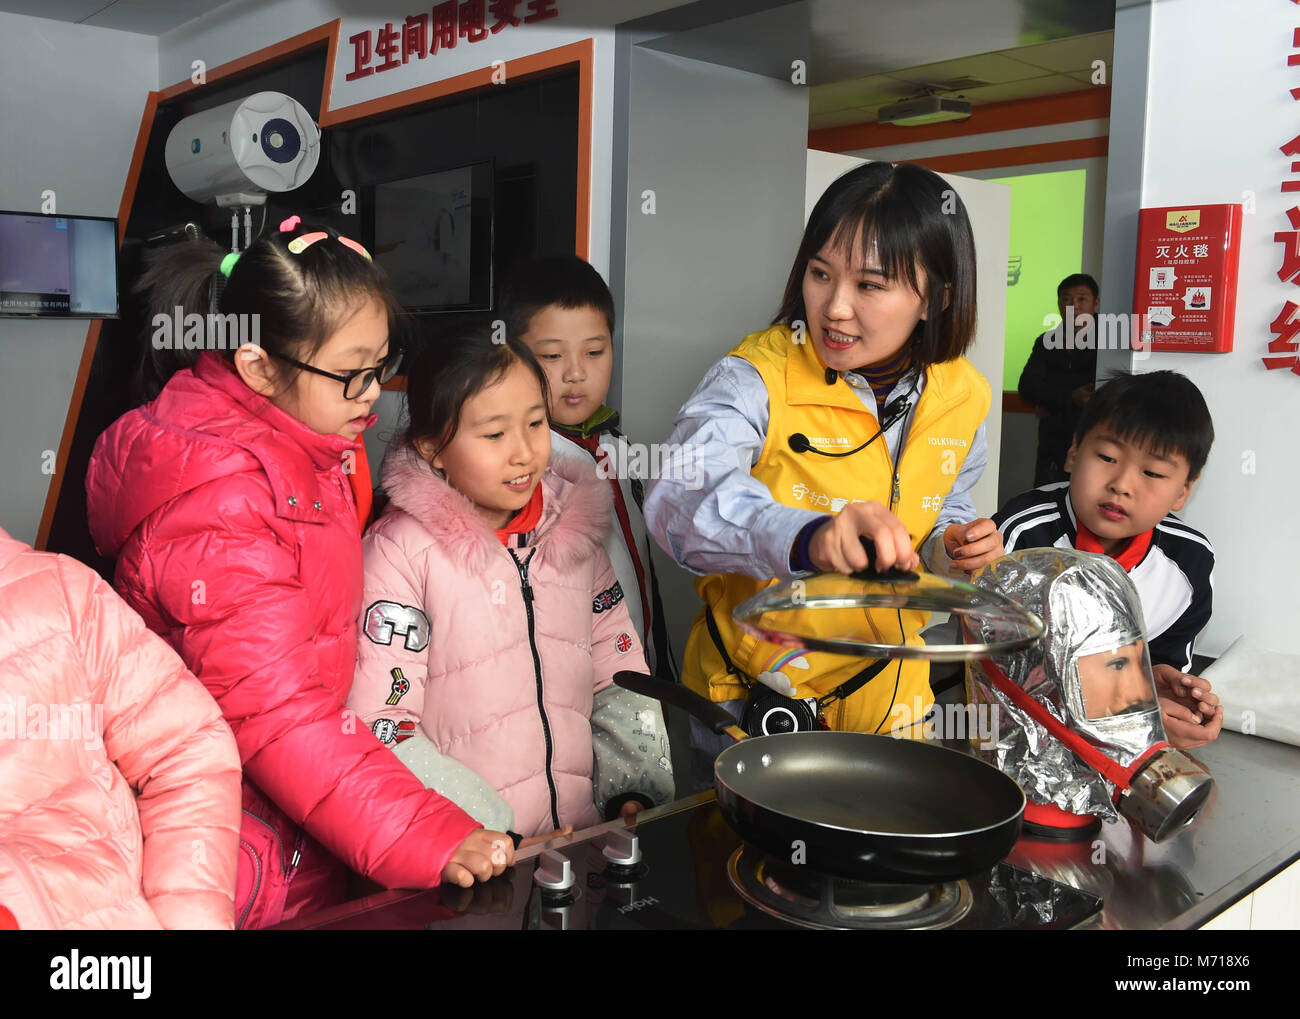 Qingdao, China's Shandong Province. 7th Mar, 2018. An instructor explains kitchen fire emergency measures to children at a home safety training center in Qingdao, east China's Shandong Province, March 7, 2018. The Qingdao Municipal Women's Federation organized a home safety workshop on Wednesday, allowing participants to learn home safety knowledge and skills via on-the-spot training sessions. Credit: Li Ziheng/Xinhua/Alamy Live News Stock Photo